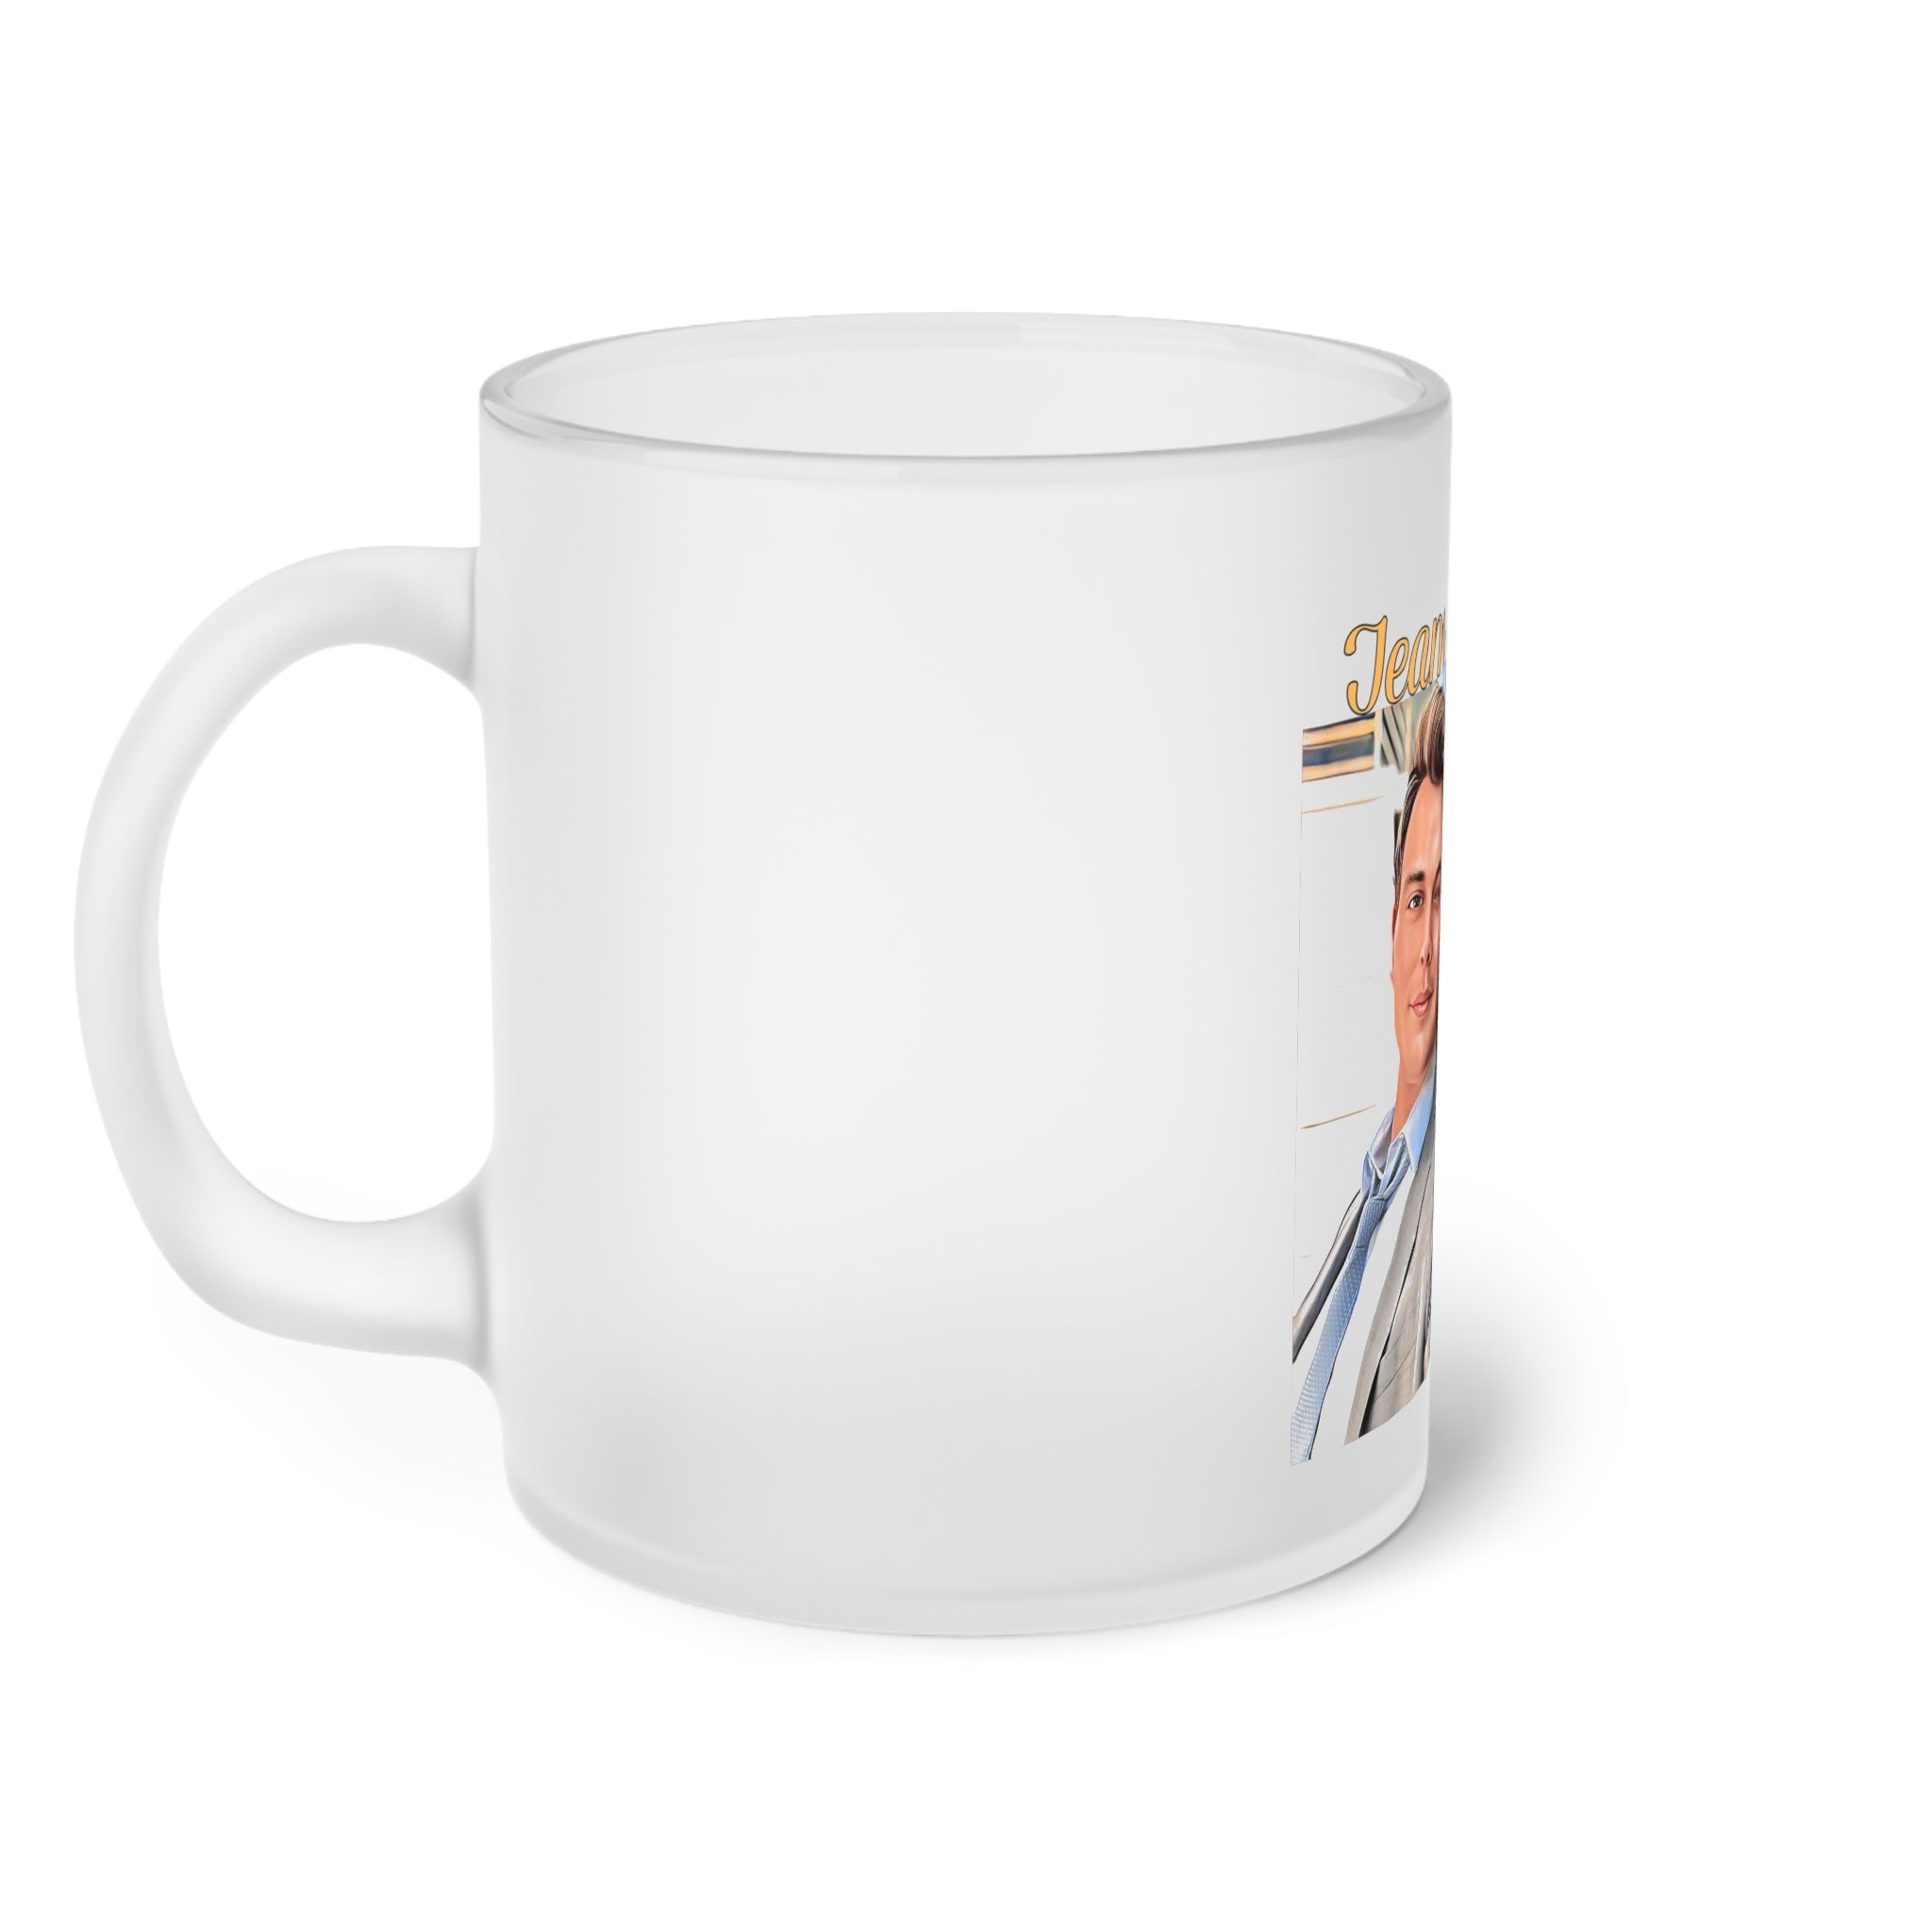 Team Millow Frosted Glass Mug